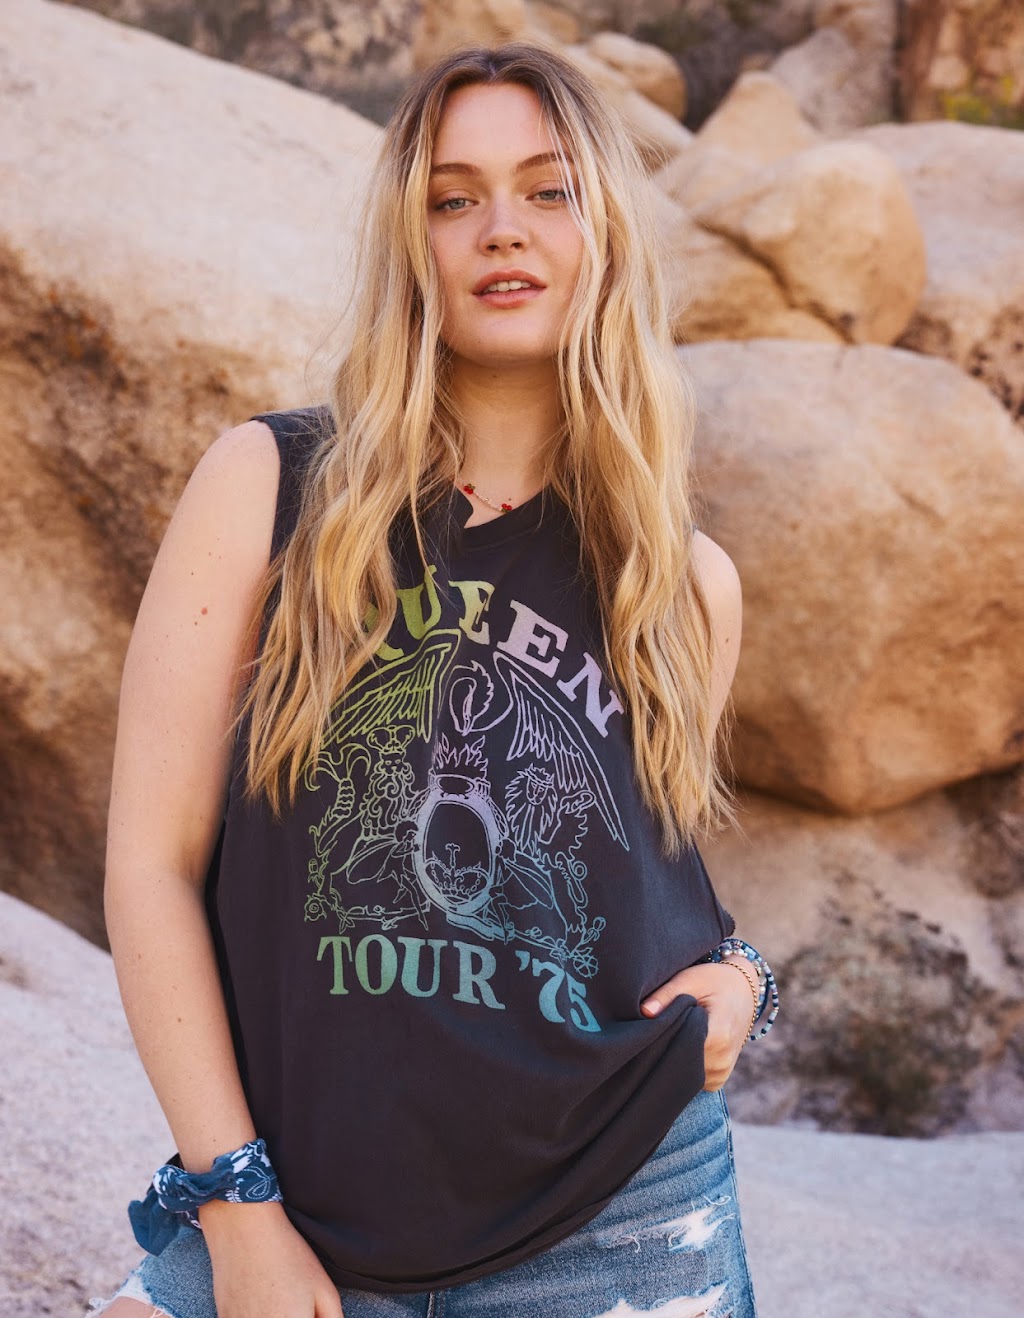 American Eagle Store | 2424 Us Highway 6 and 50, Grand Junction, CO 81505 | Phone: (970) 241-7646